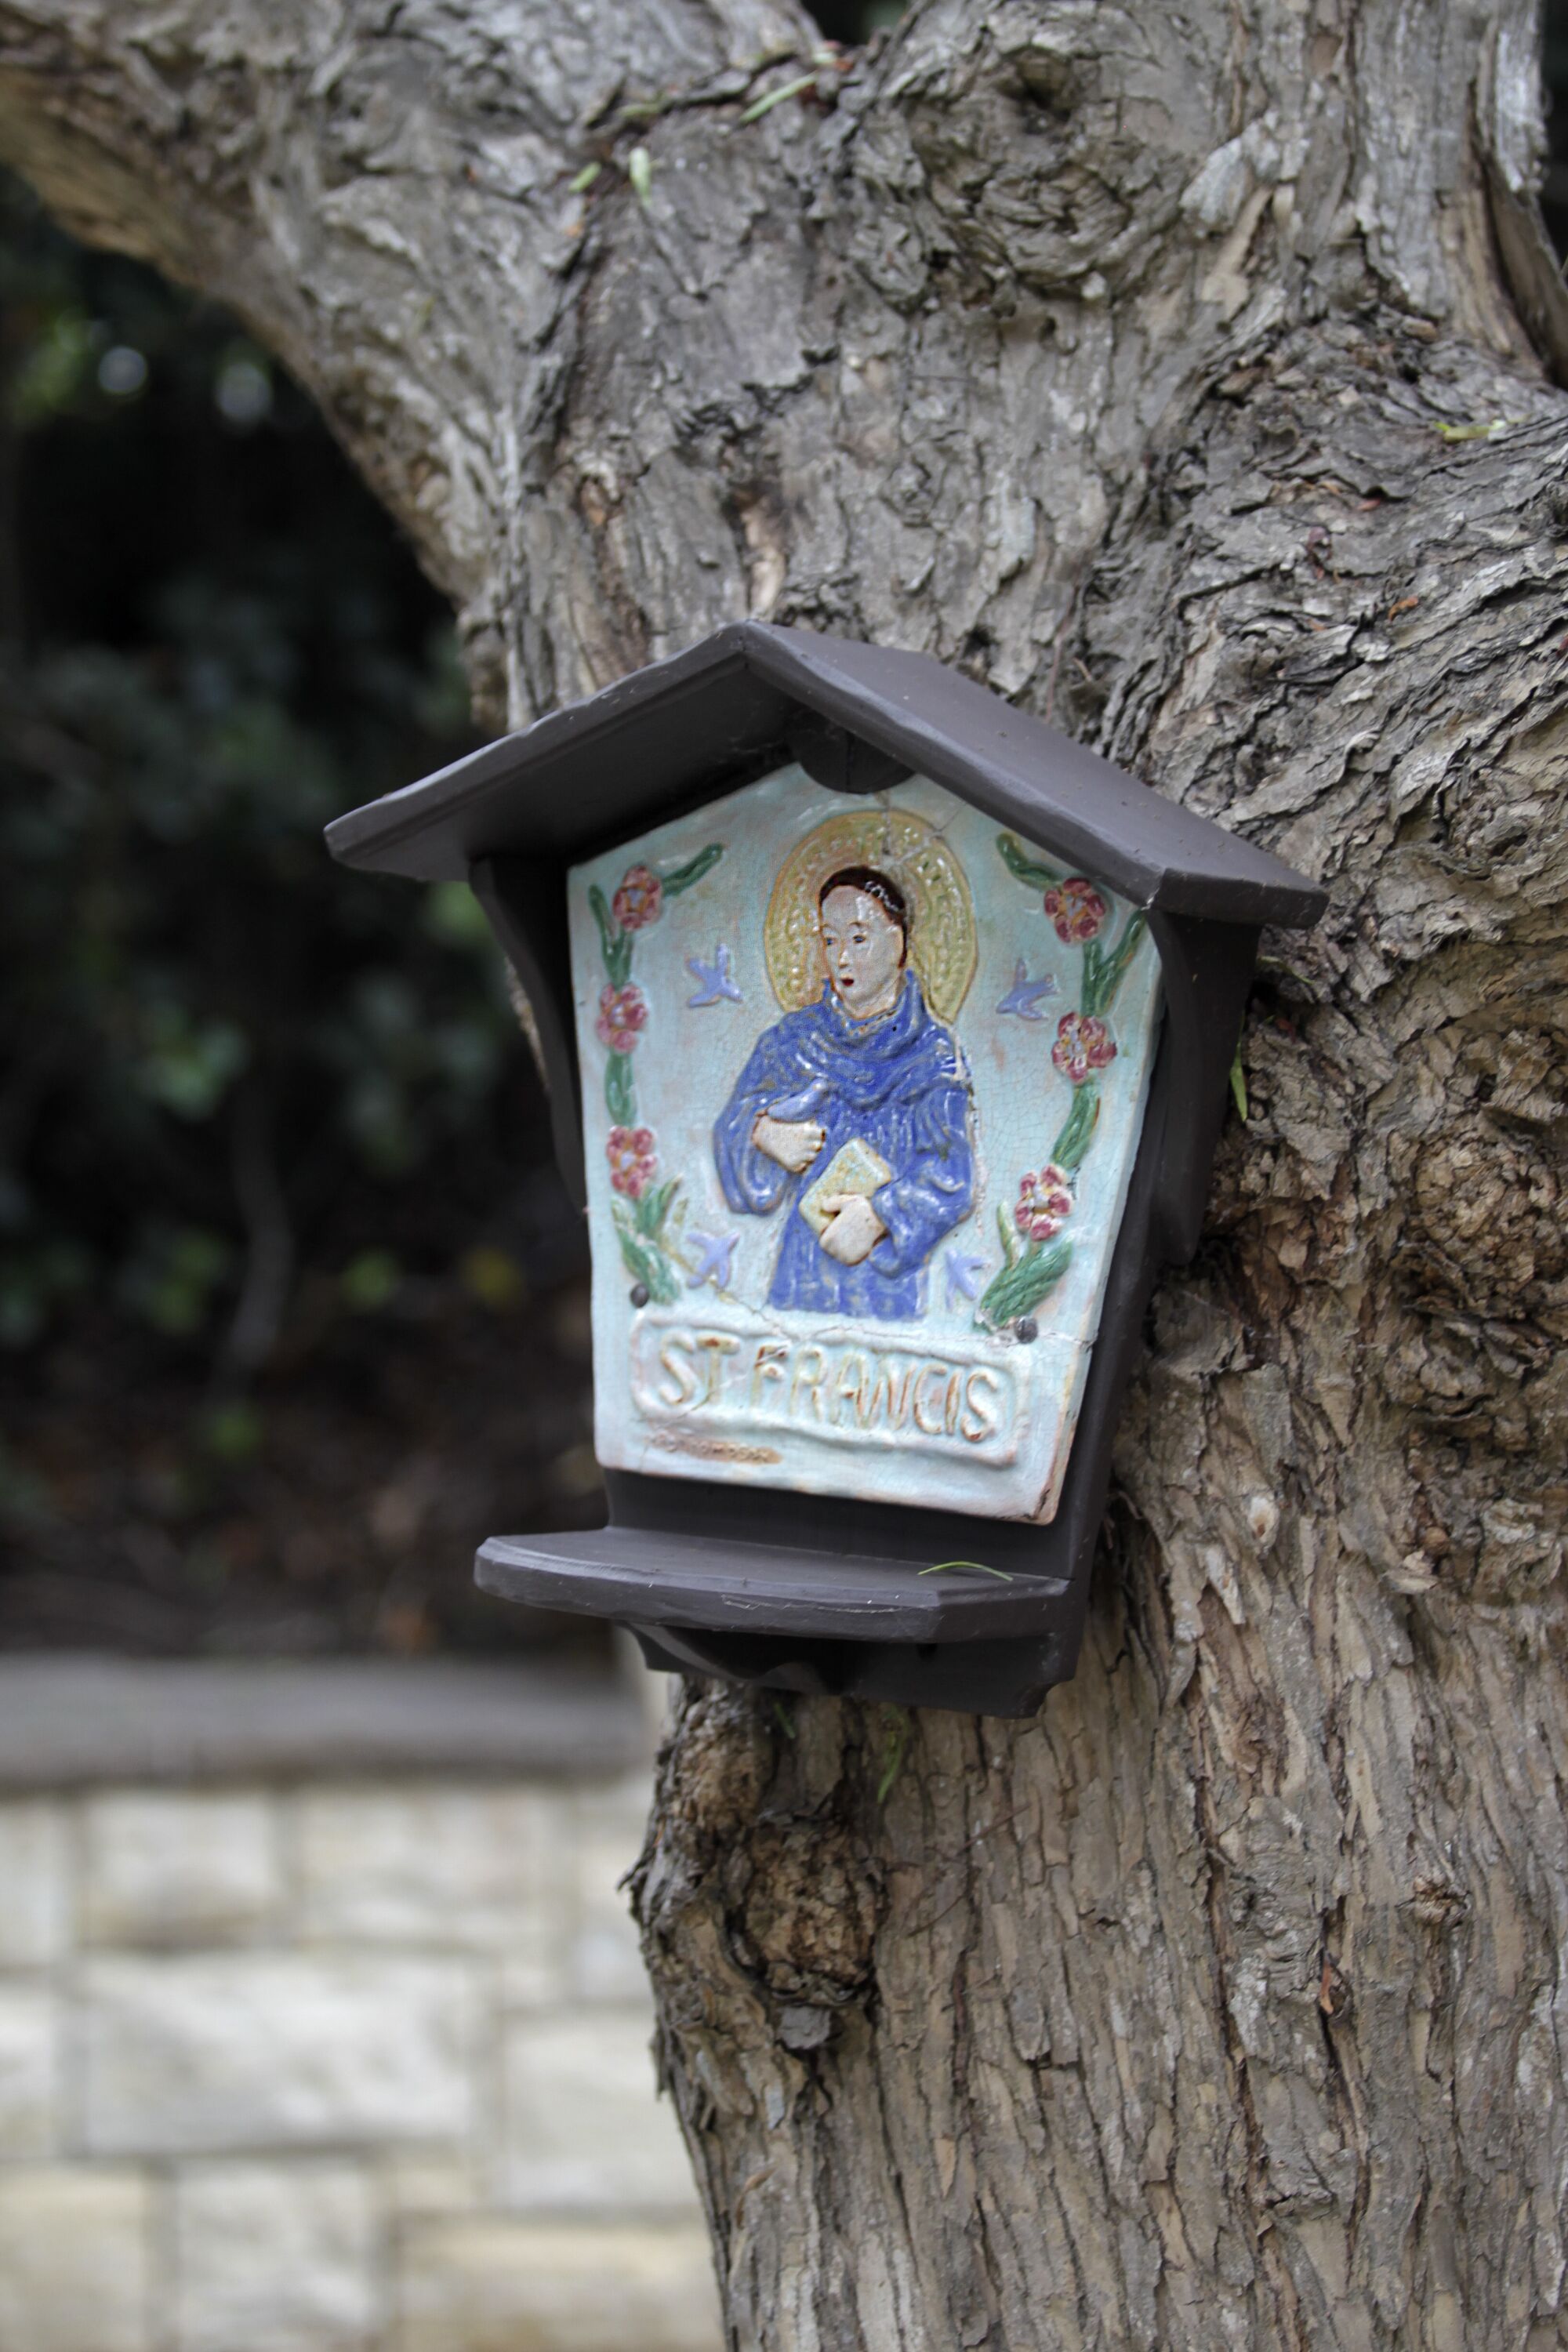 An image of St. Francis anchors the Garden of St. Francis in the Self-Realization Fellowship Meditation Gardens in Encinitas.